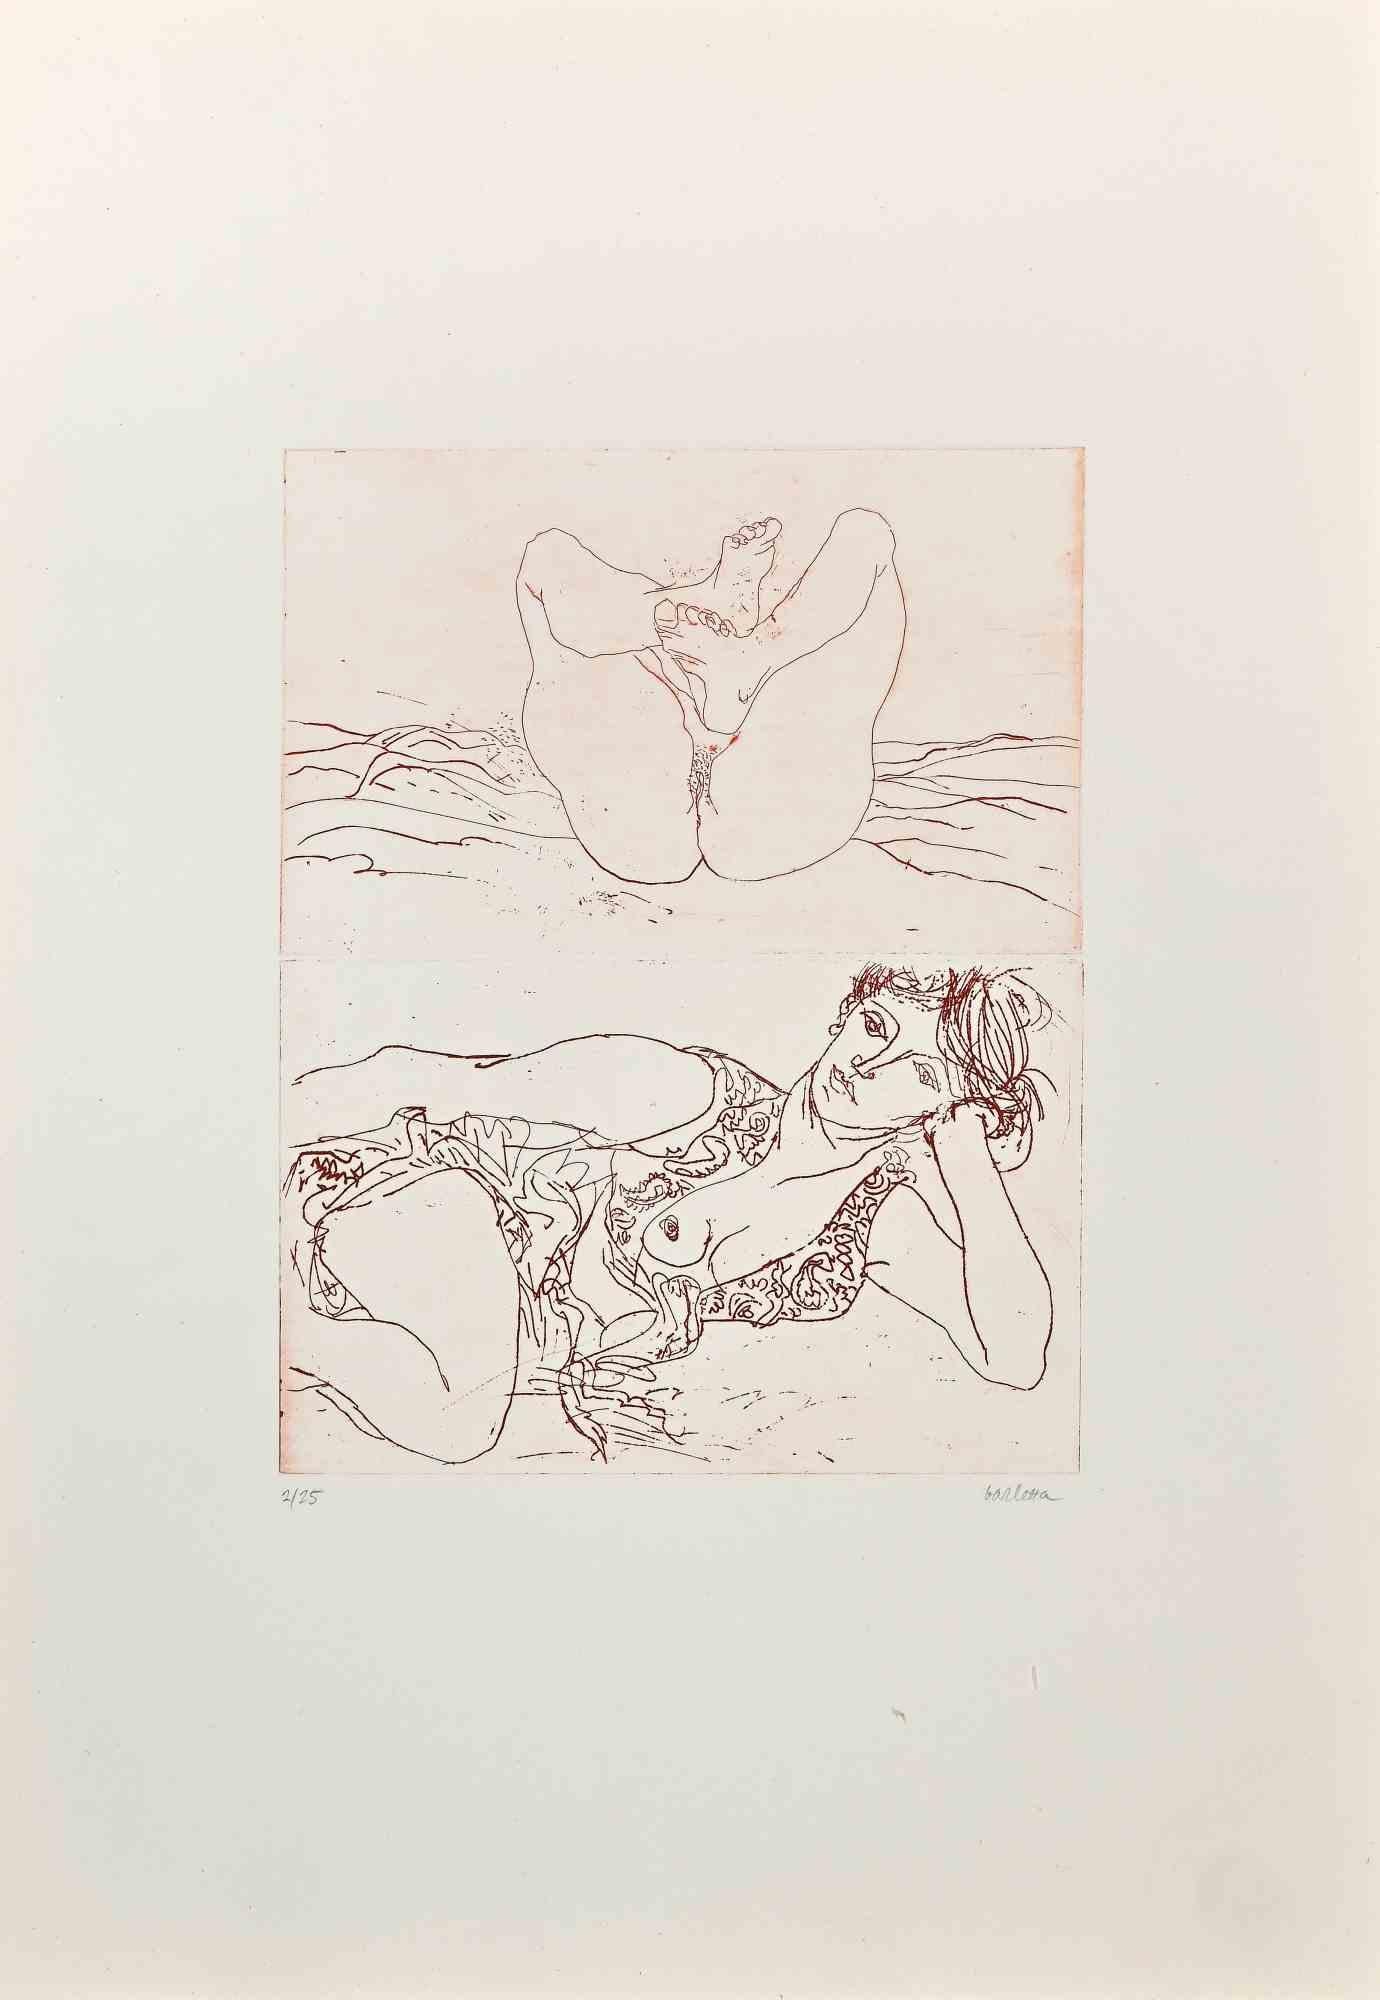 A dream is an artwork realized by Sergio Barletta, 1960s. 

Etching, 50 x 34 cm.

Edition 2/25

Handsigned lower right bottom.

Good conditions